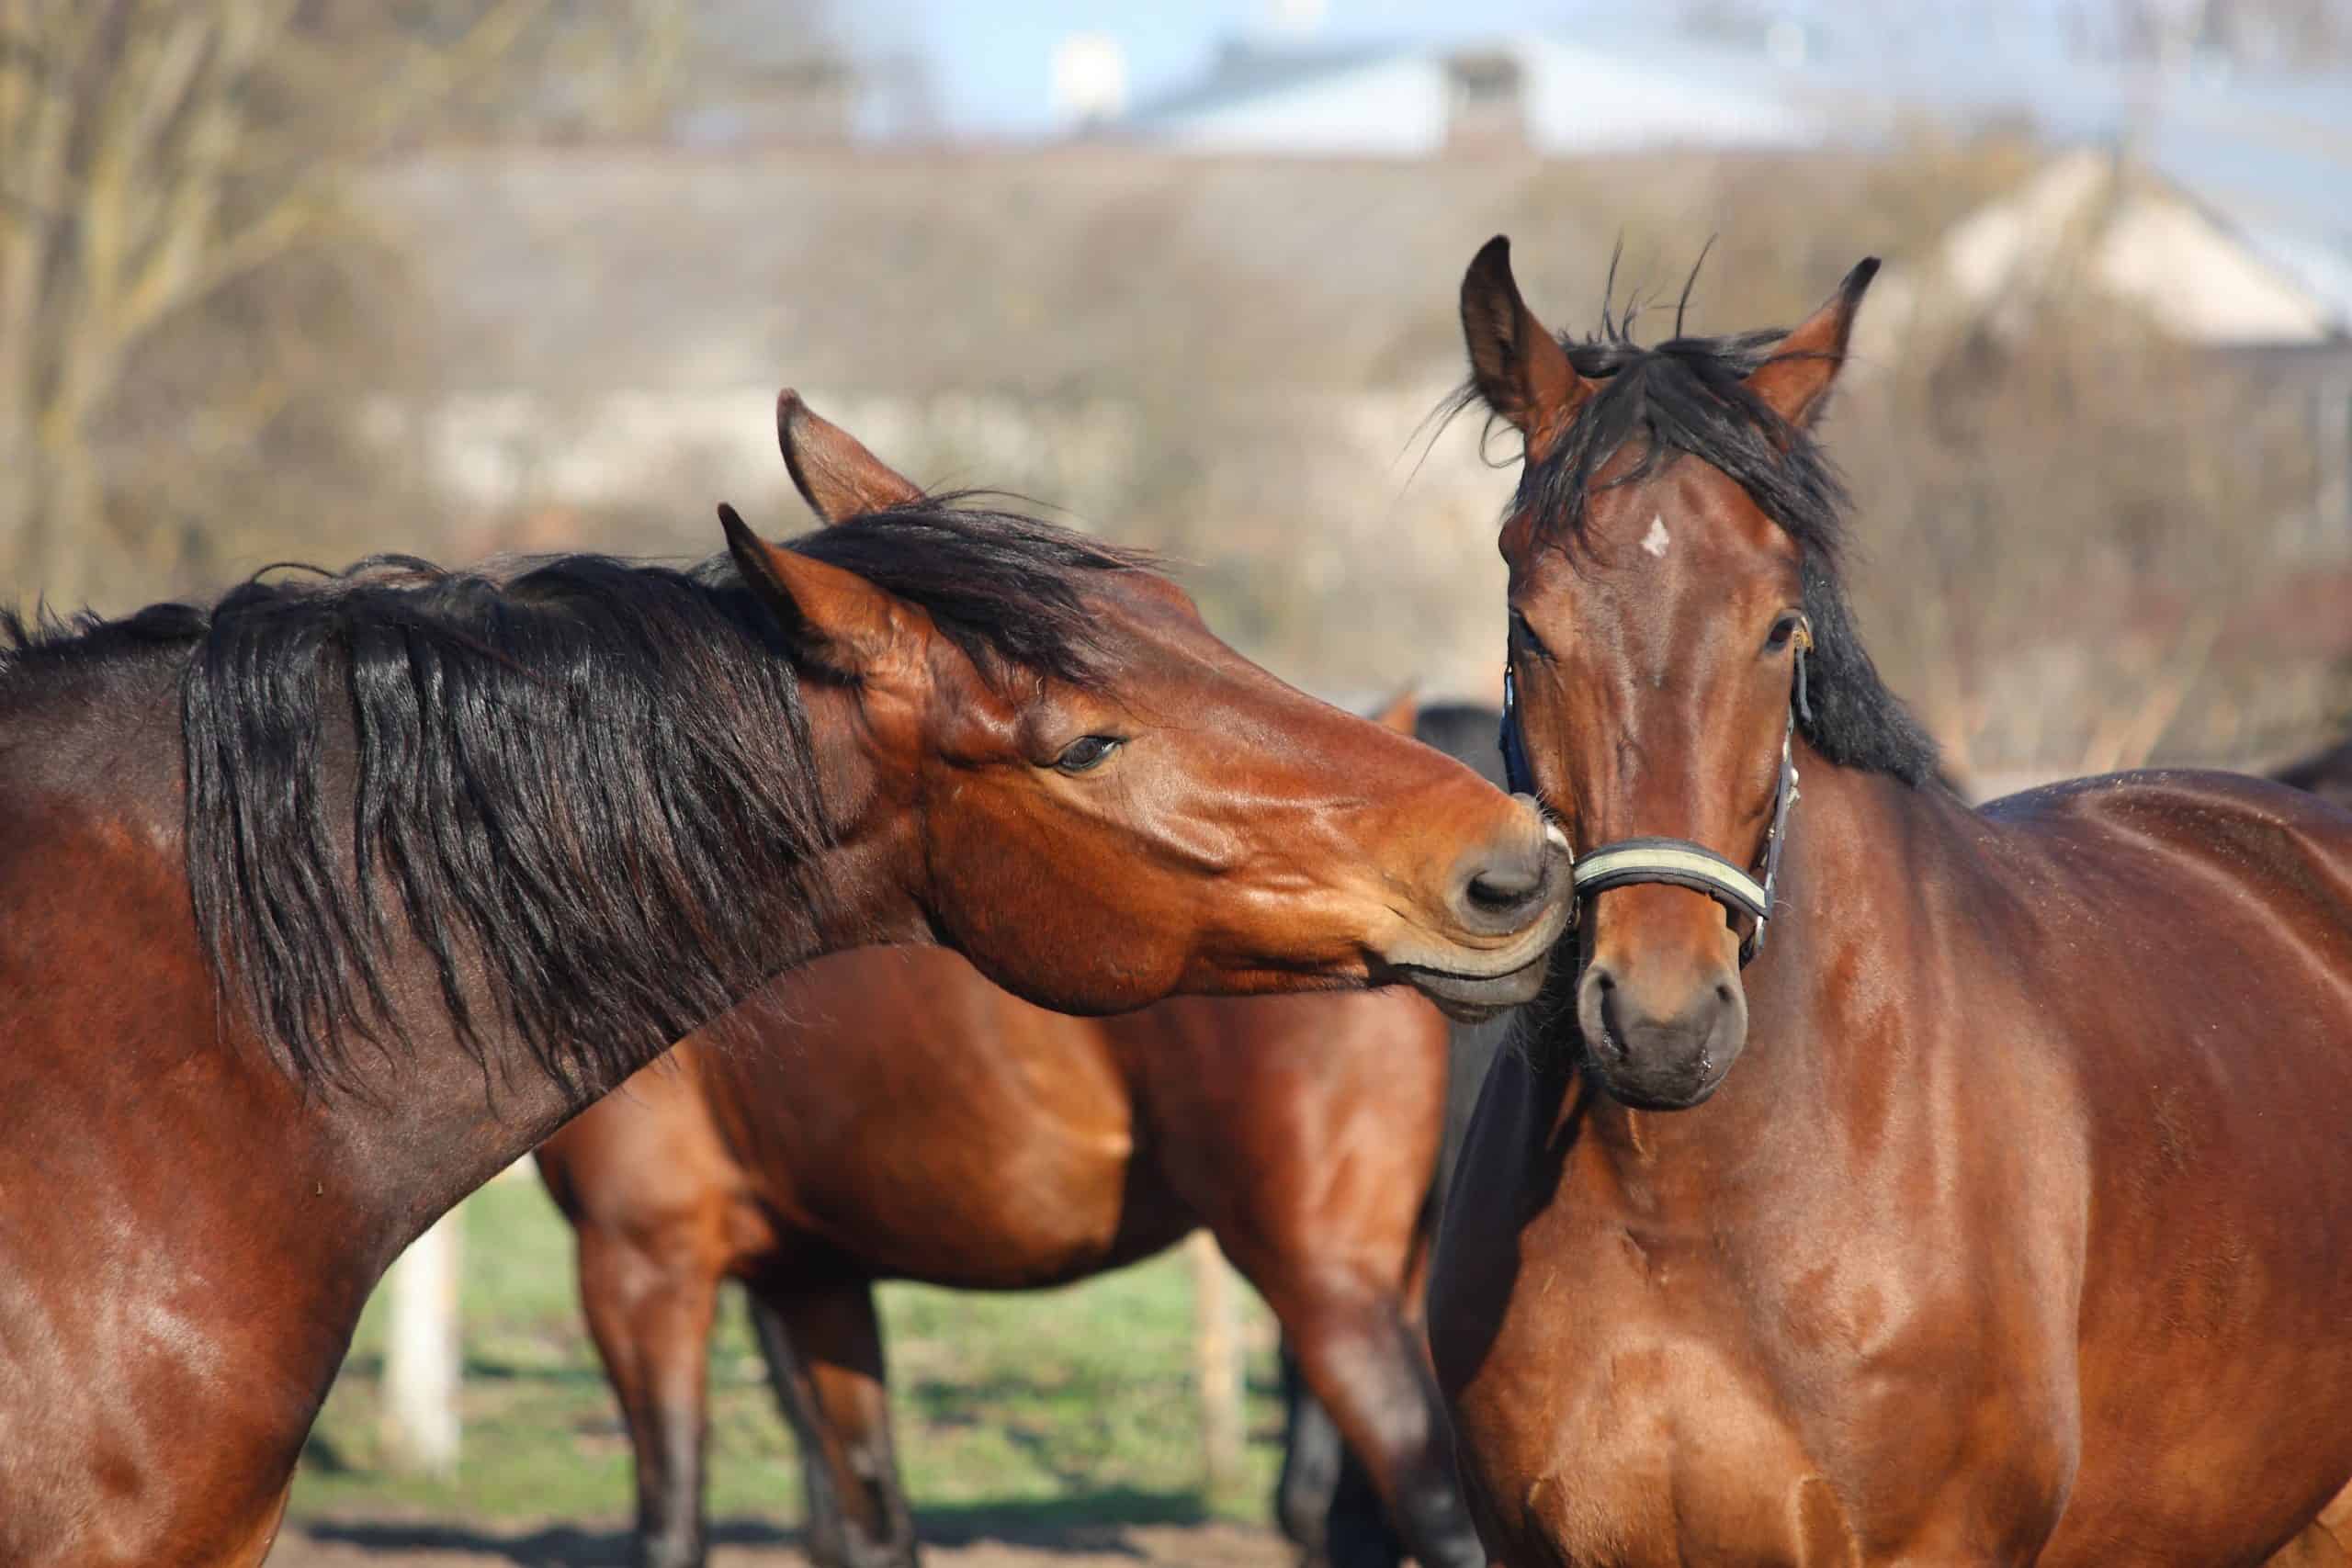 Two bay horses nuzzling each other